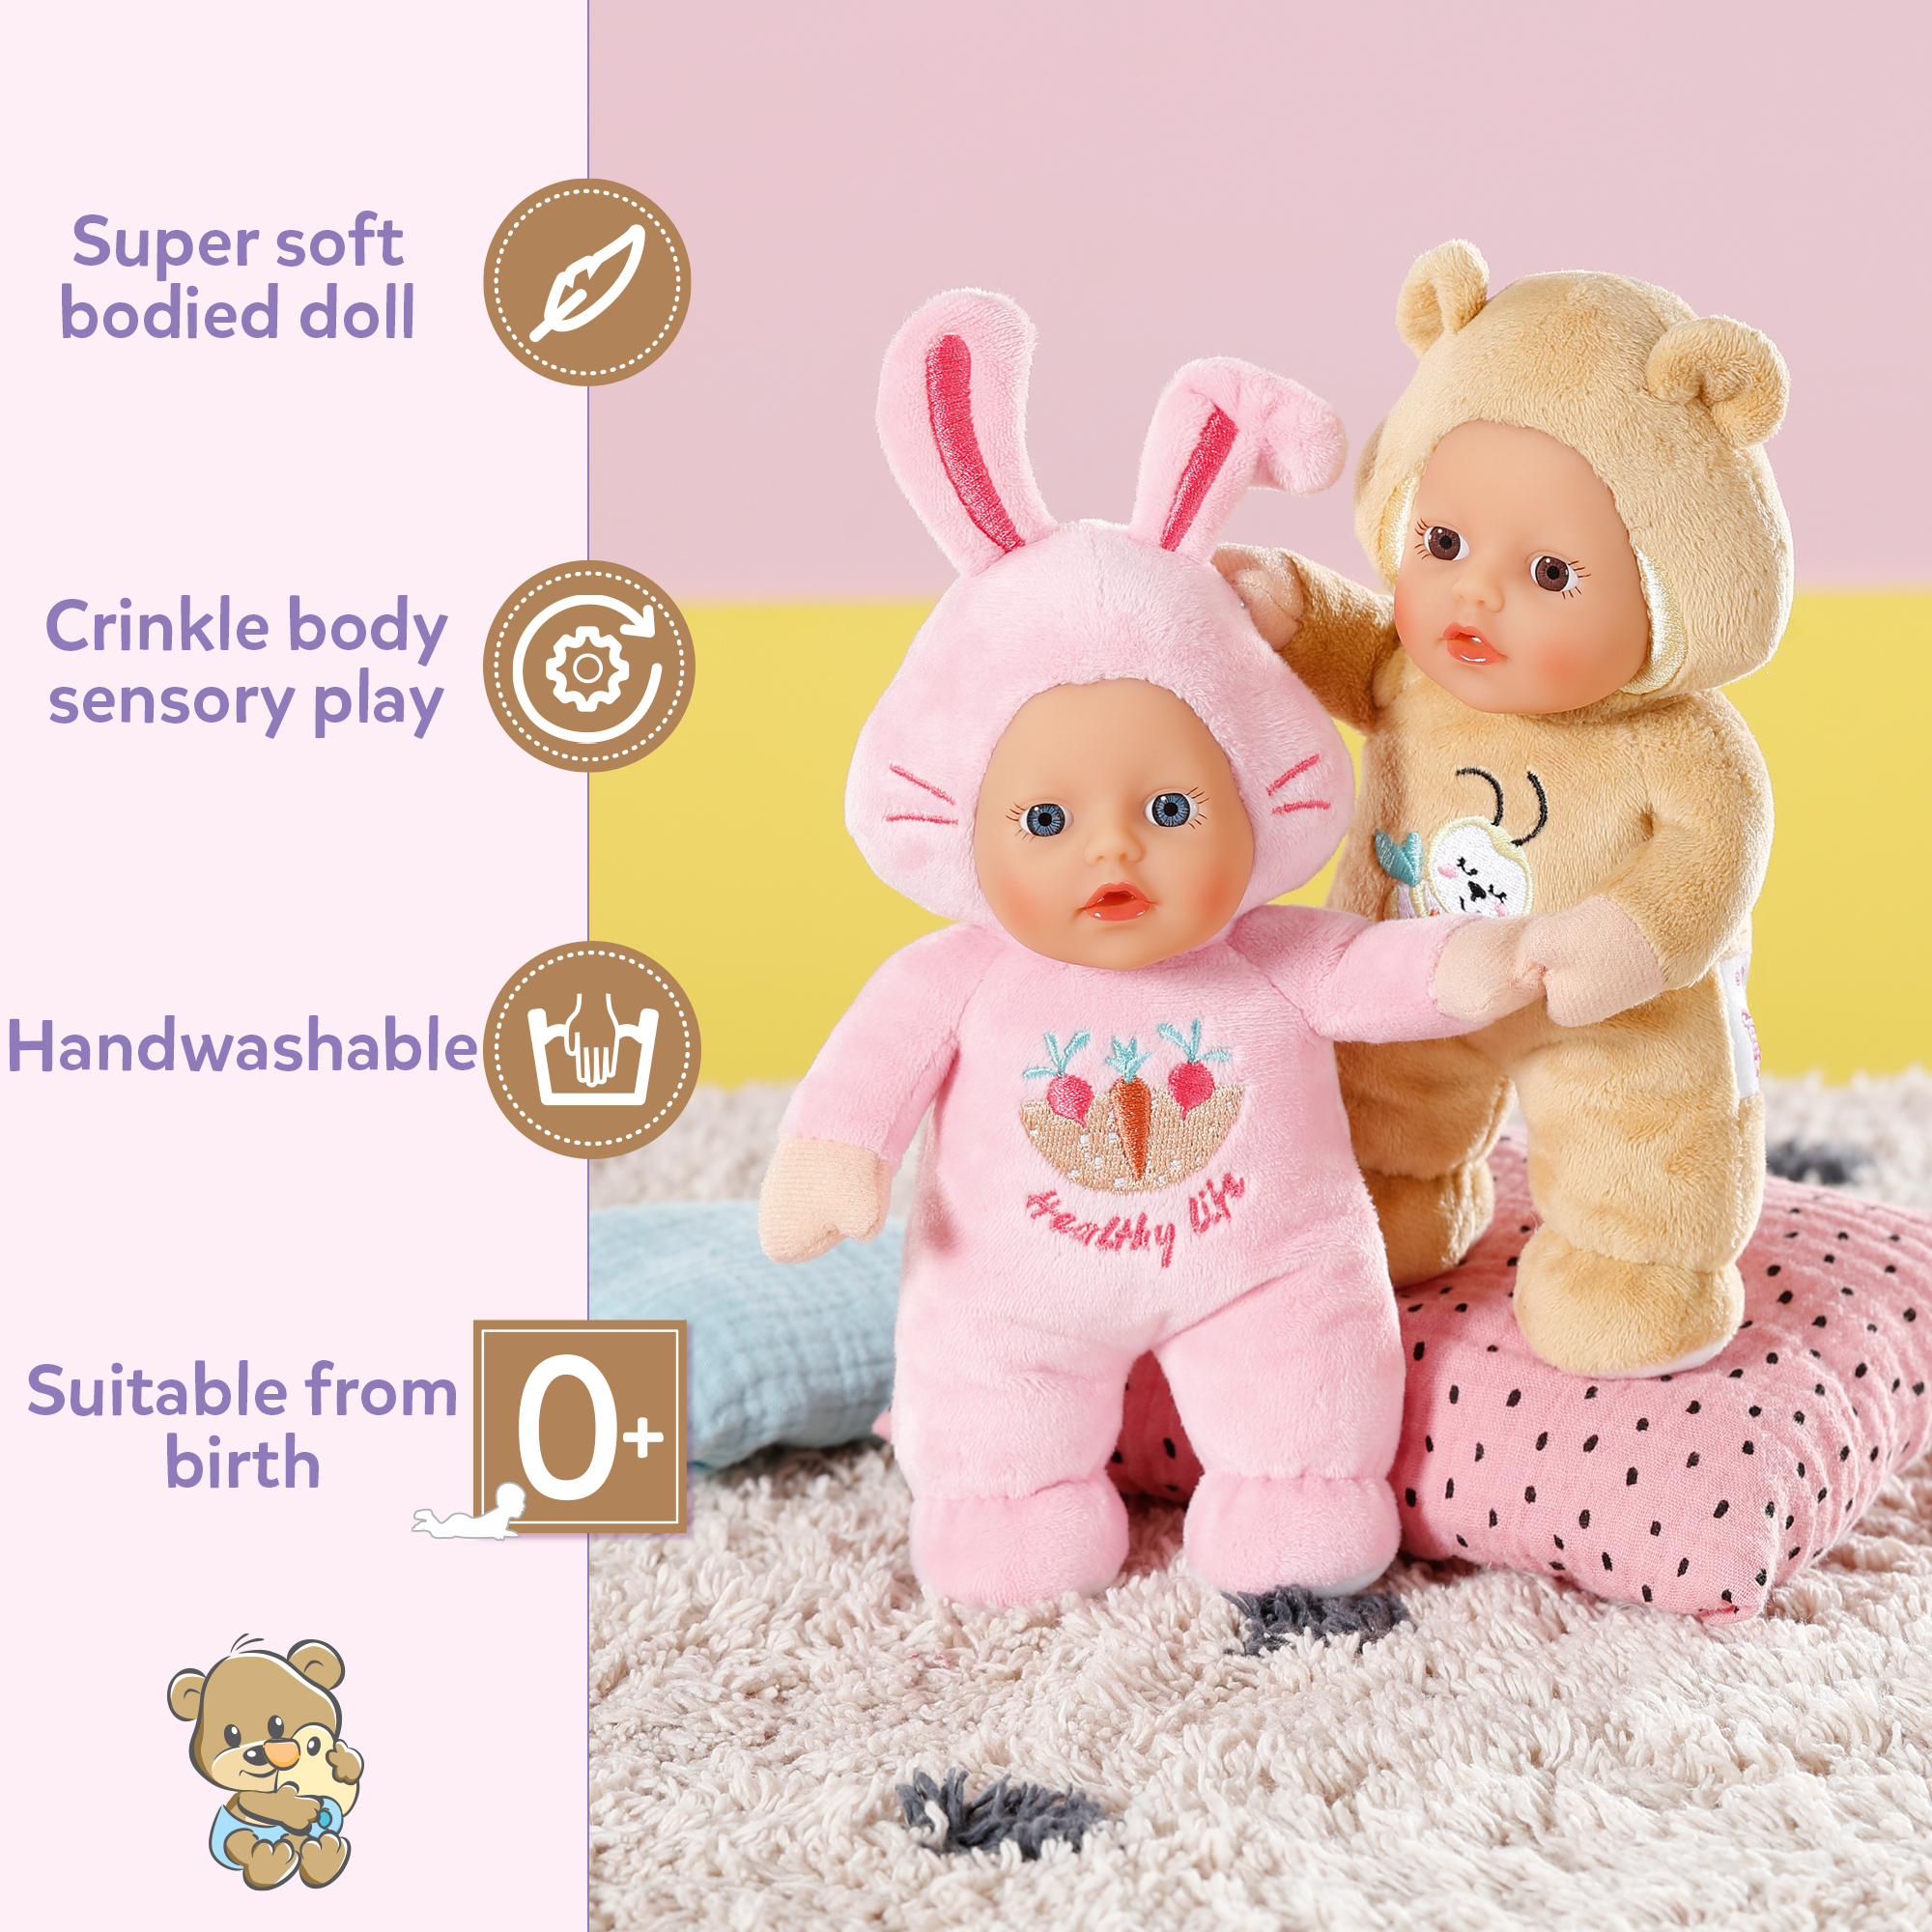 BABY born Cutie for babies 18cm Doll